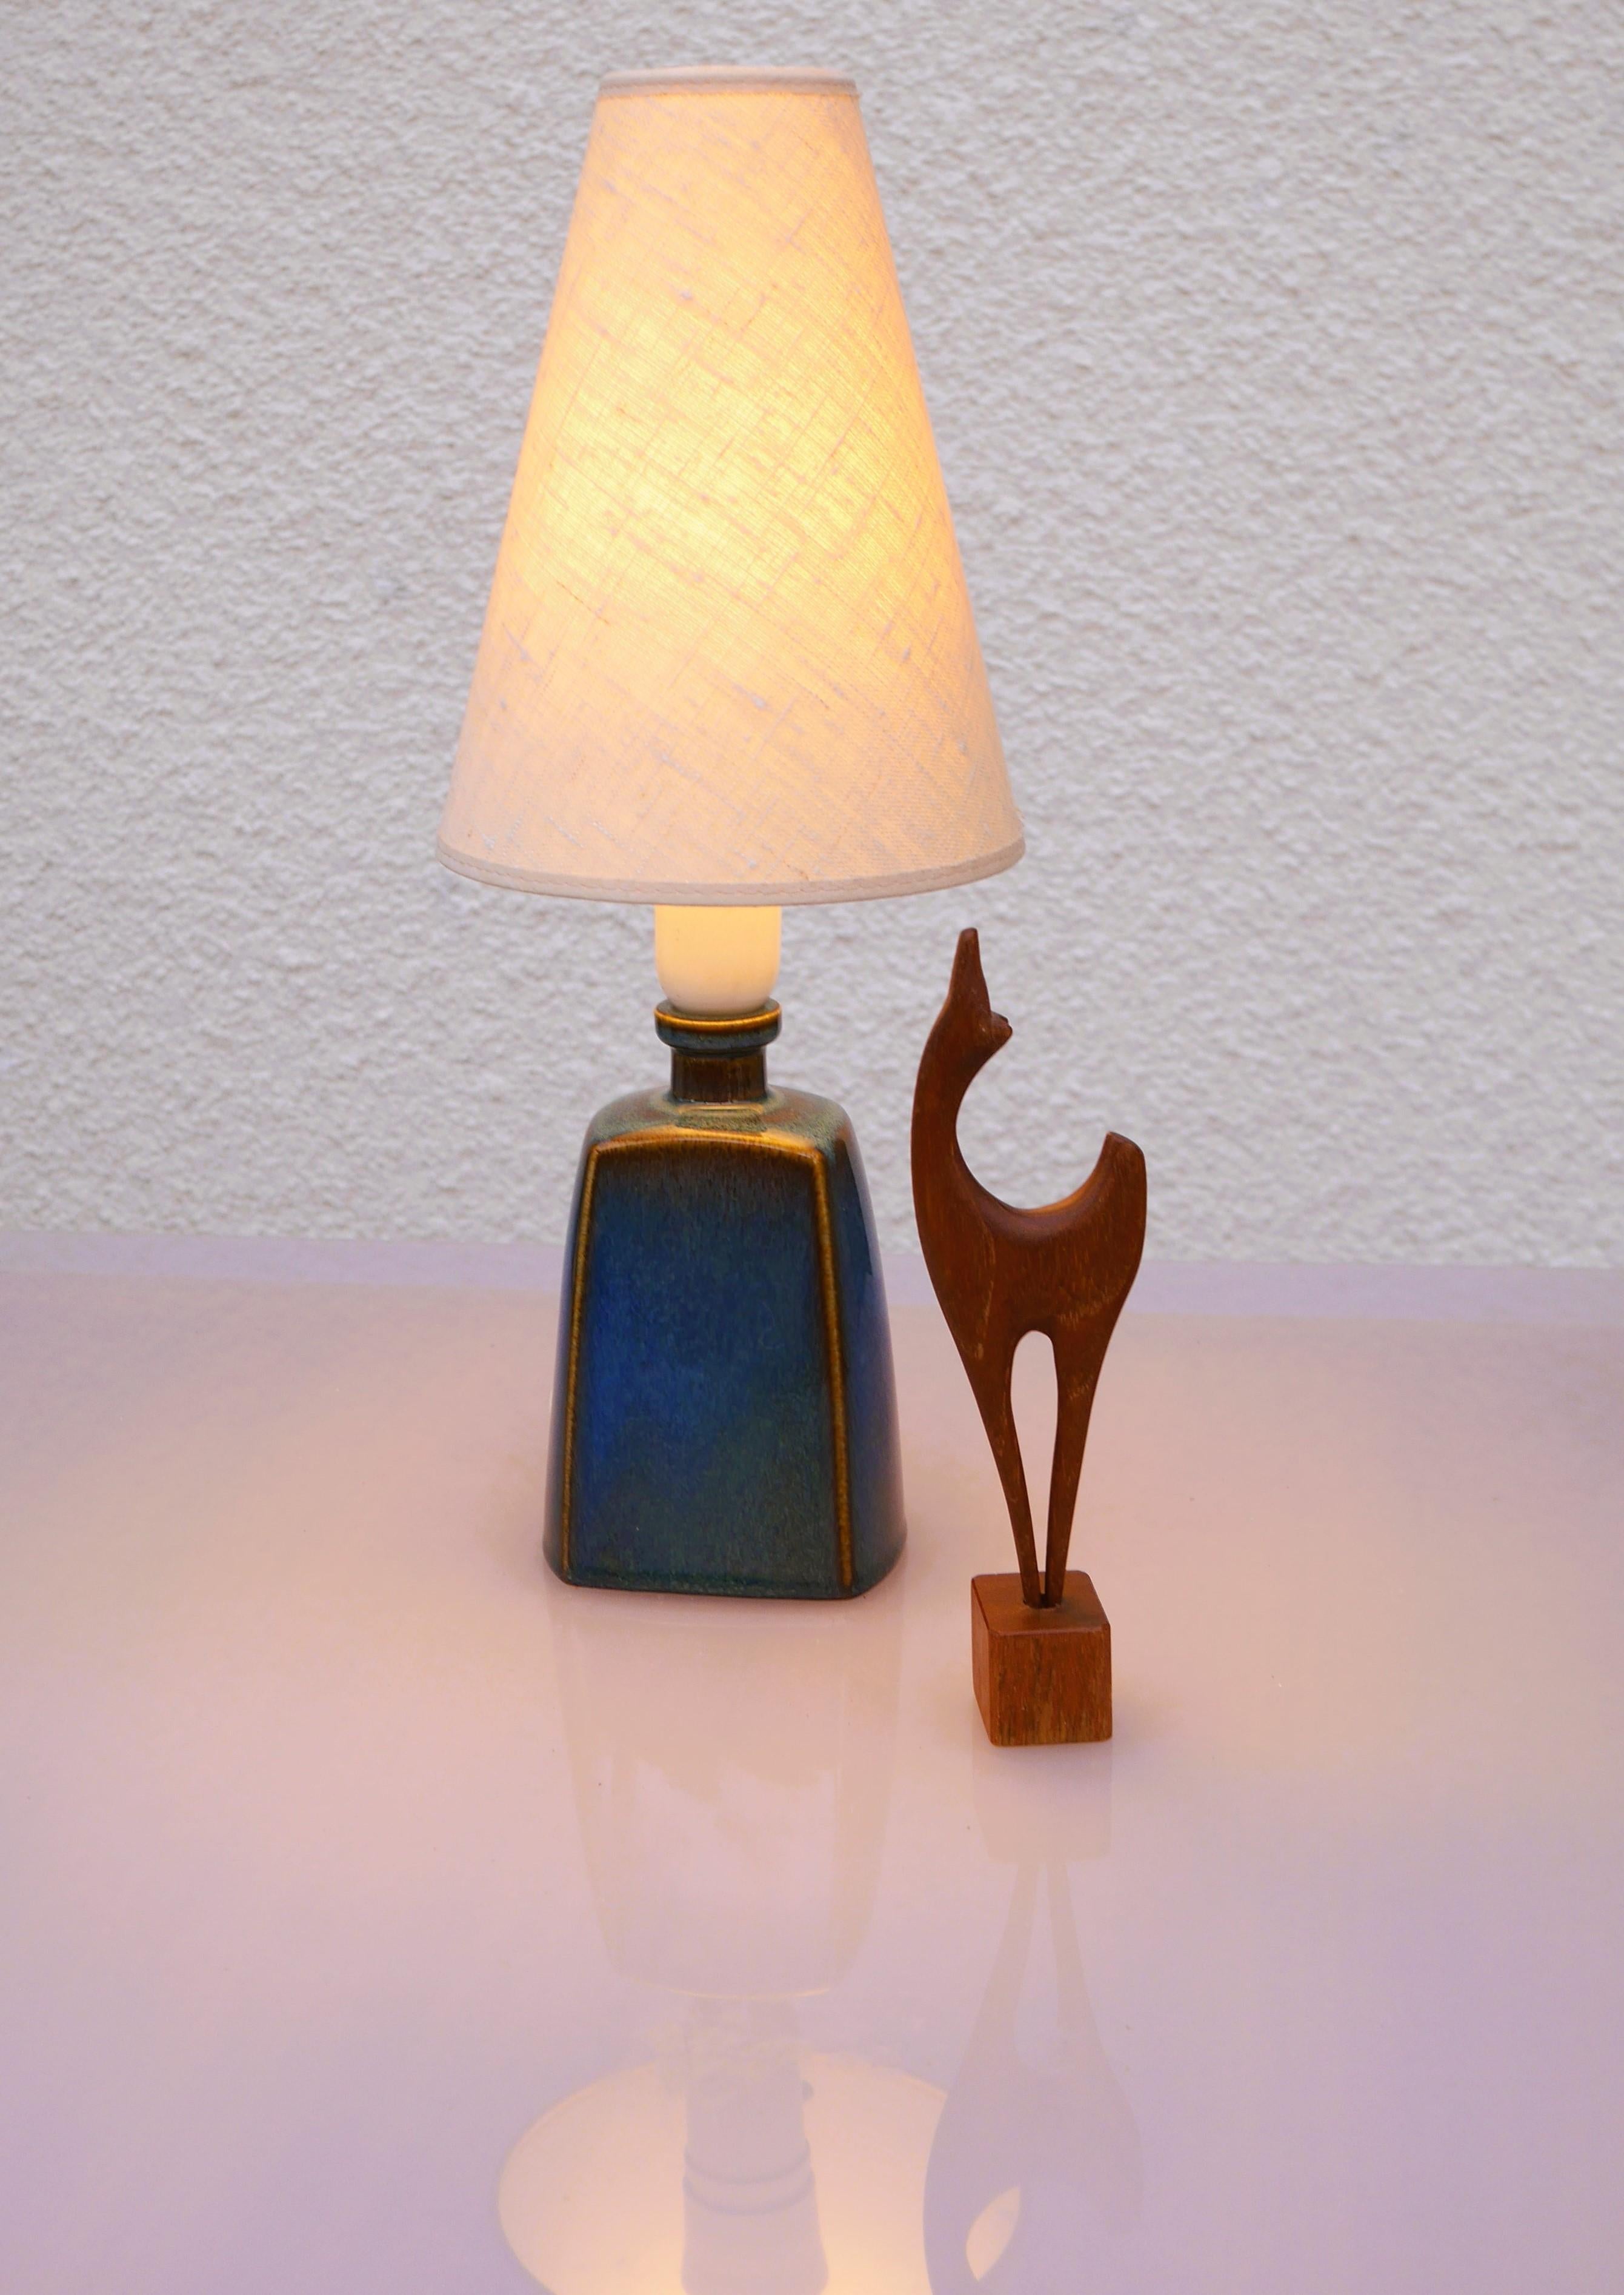 Swedish Mid-century modern pottery lamp base, known as 